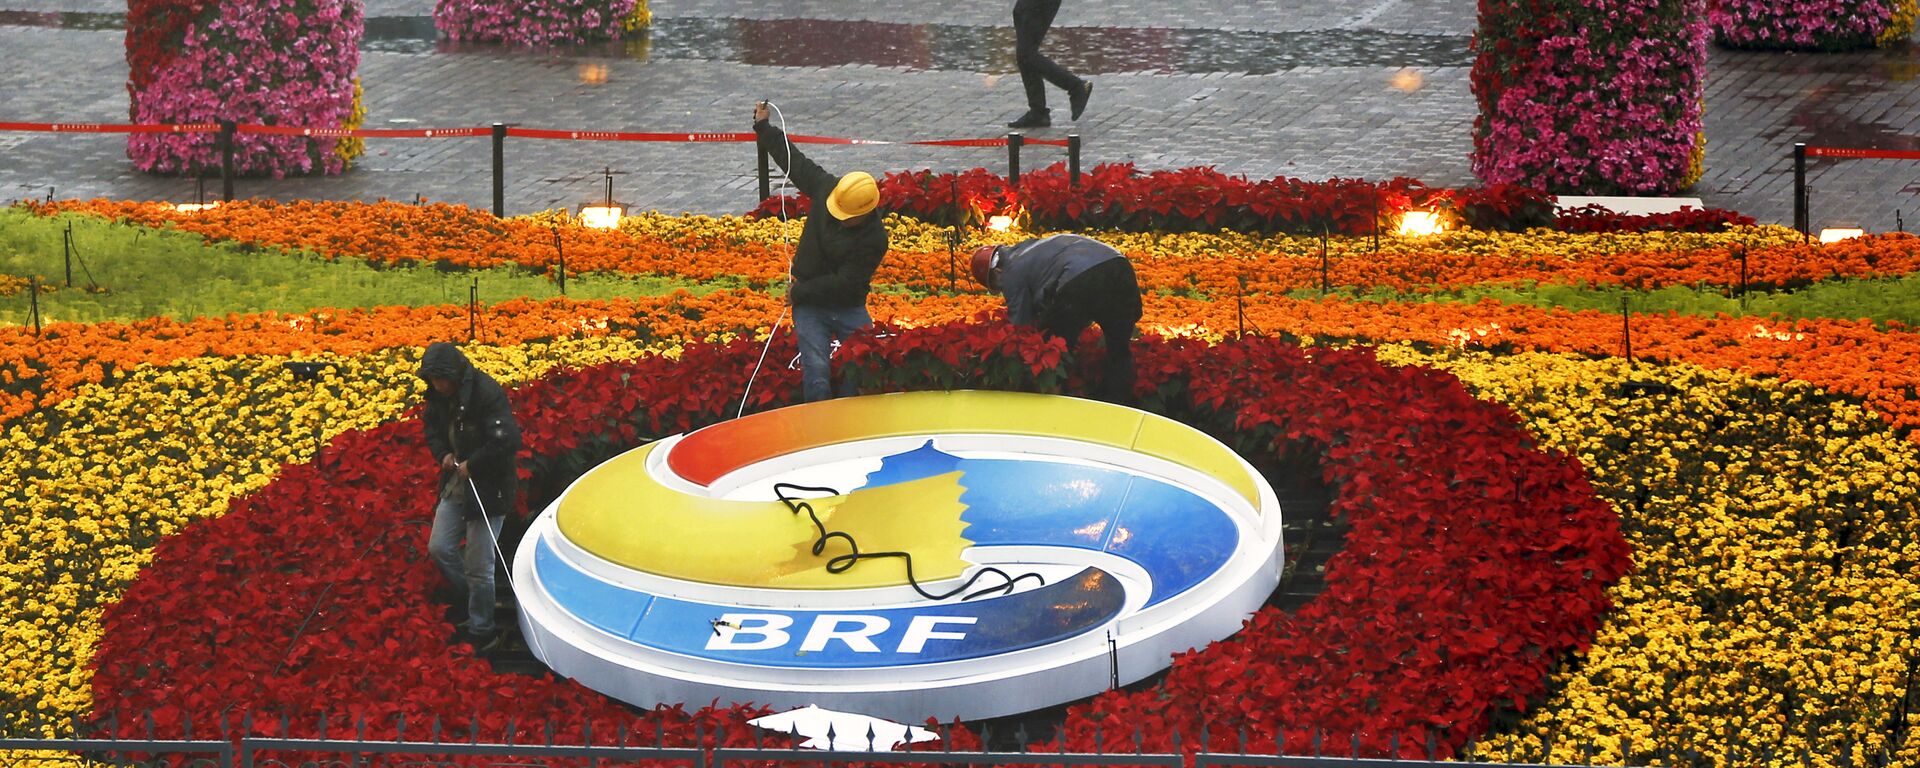 A man carrying an umbrella to shield from the rain as workers dismantle the Belt and Road Forum logo outside the media center as leaders are attending the round table summit of the Belt and Road Forum chaired by Chinese President Xi Jinping in Beijing, Saturday, April 27, 2019 - Sputnik International, 1920, 05.07.2019